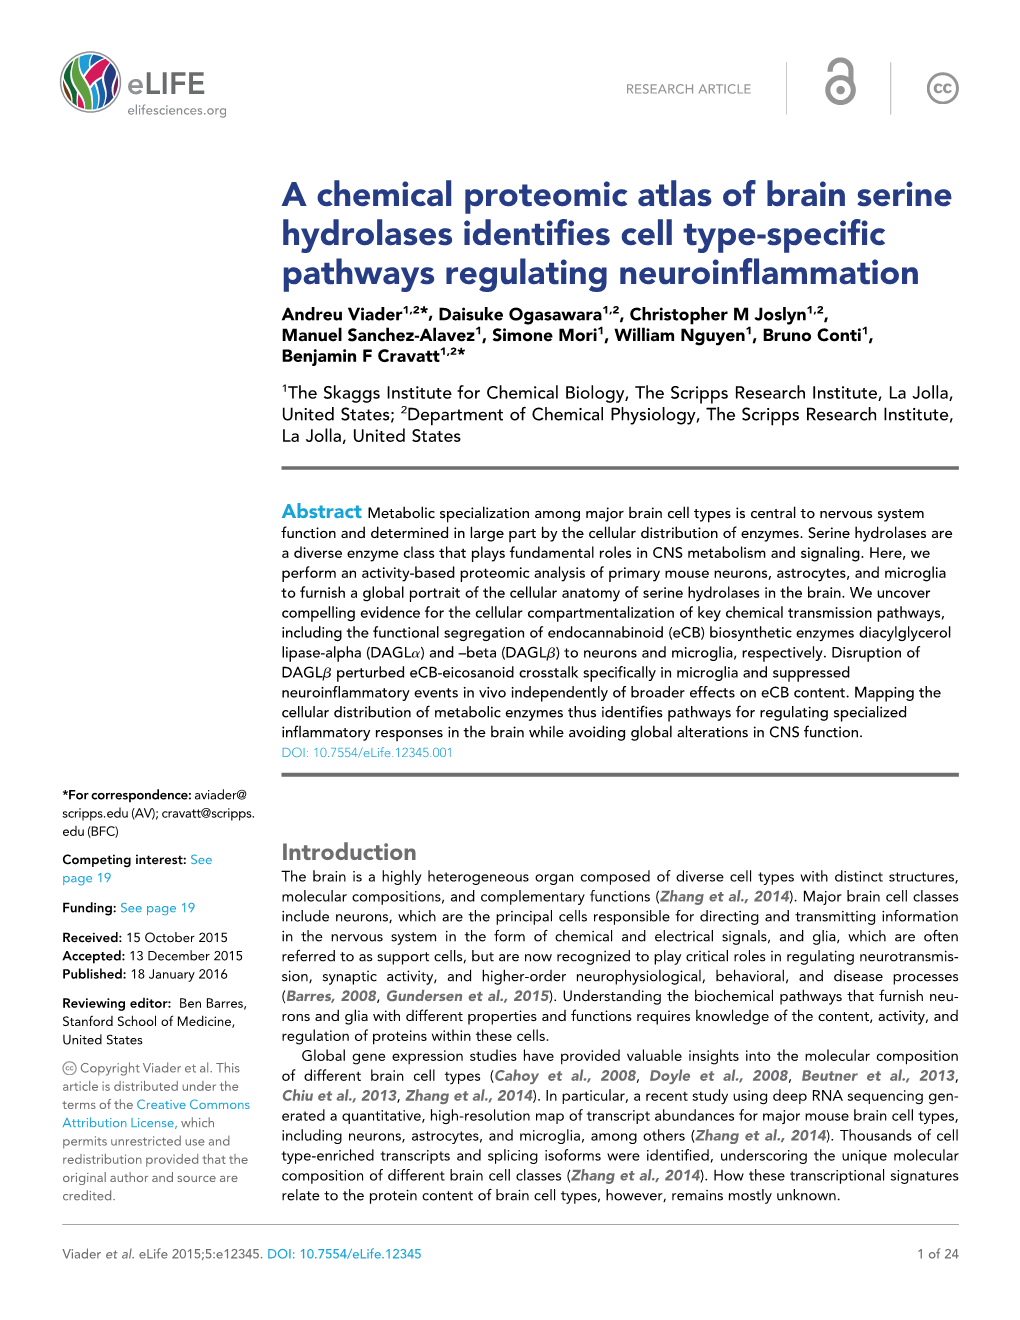 A Chemical Proteomic Atlas of Brain Serine Hydrolases Identifies Cell